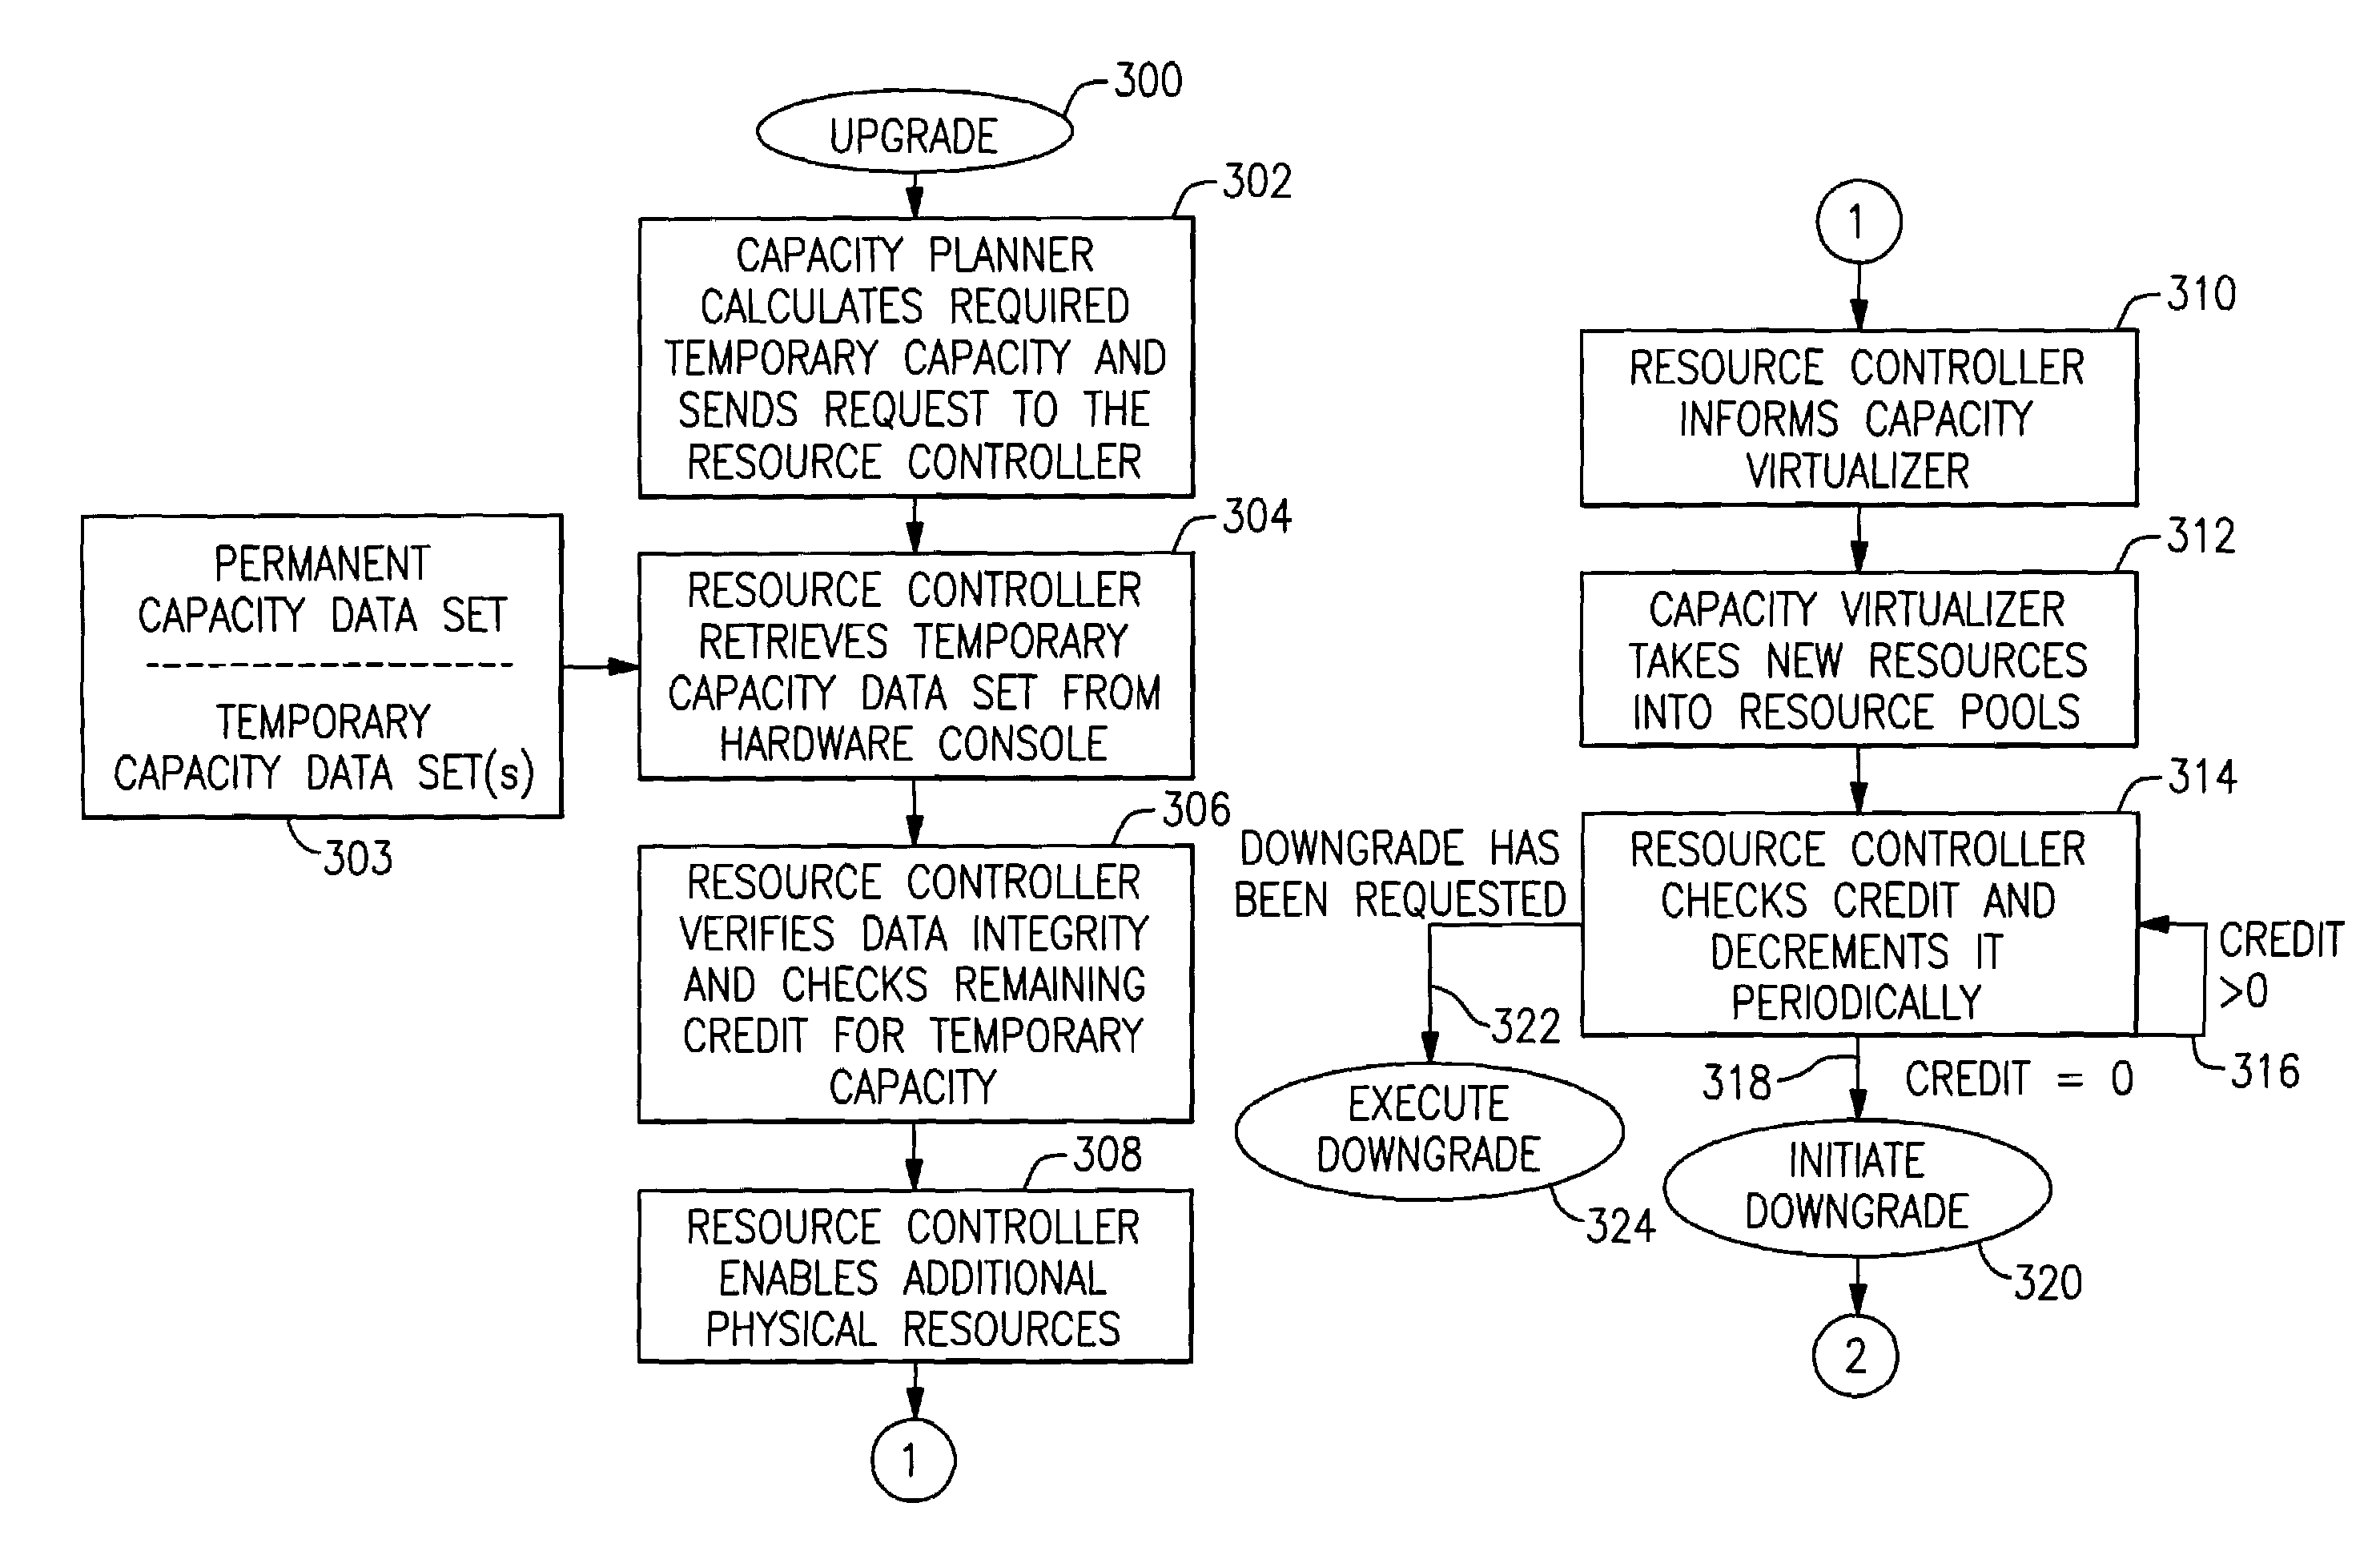 Flexible temporary capacity upgrade/downgrade in a computer system without involvement of the operating system